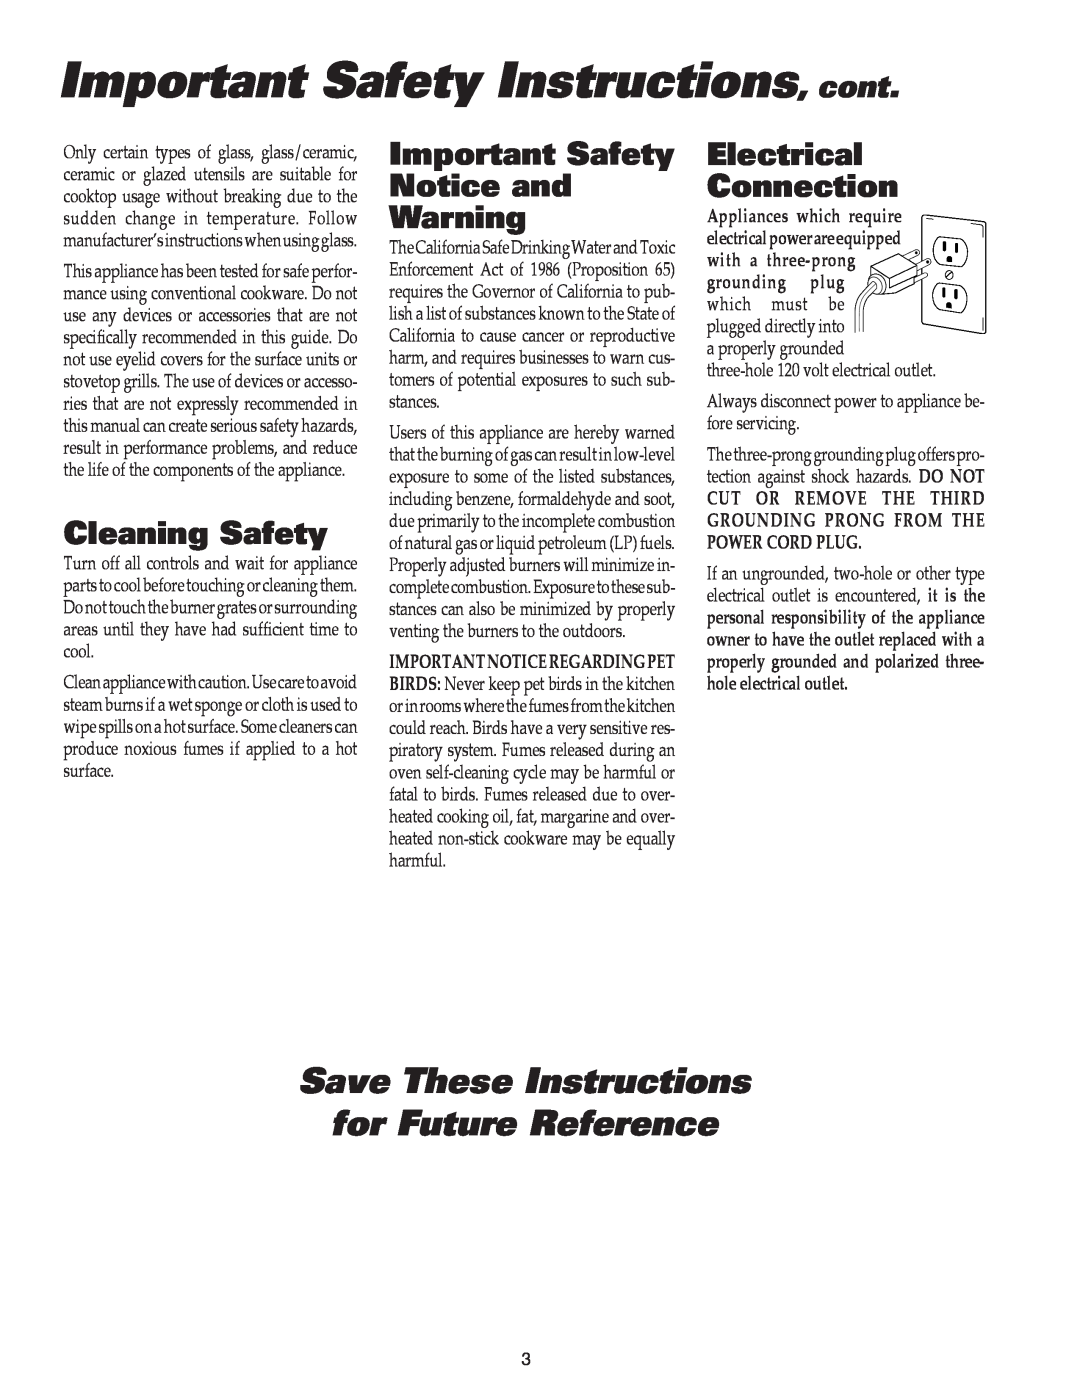 Maytag 8111P504-60 Important Safety Instructions, cont, Save These Instructions for Future Reference, Cleaning Safety 